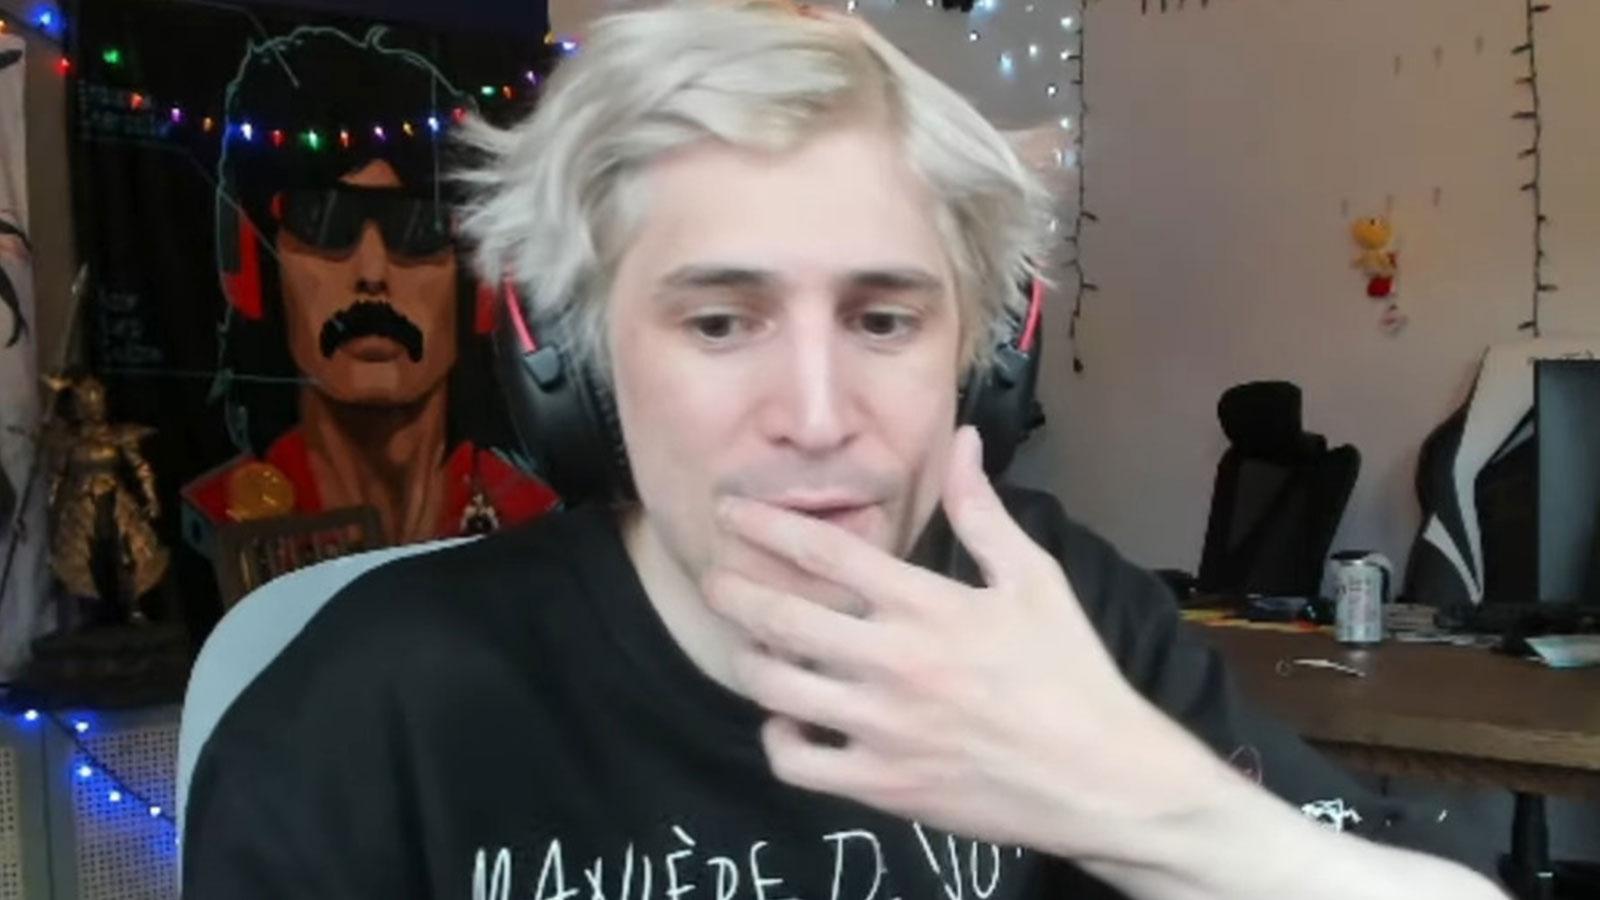 xQc holding hand over mouth